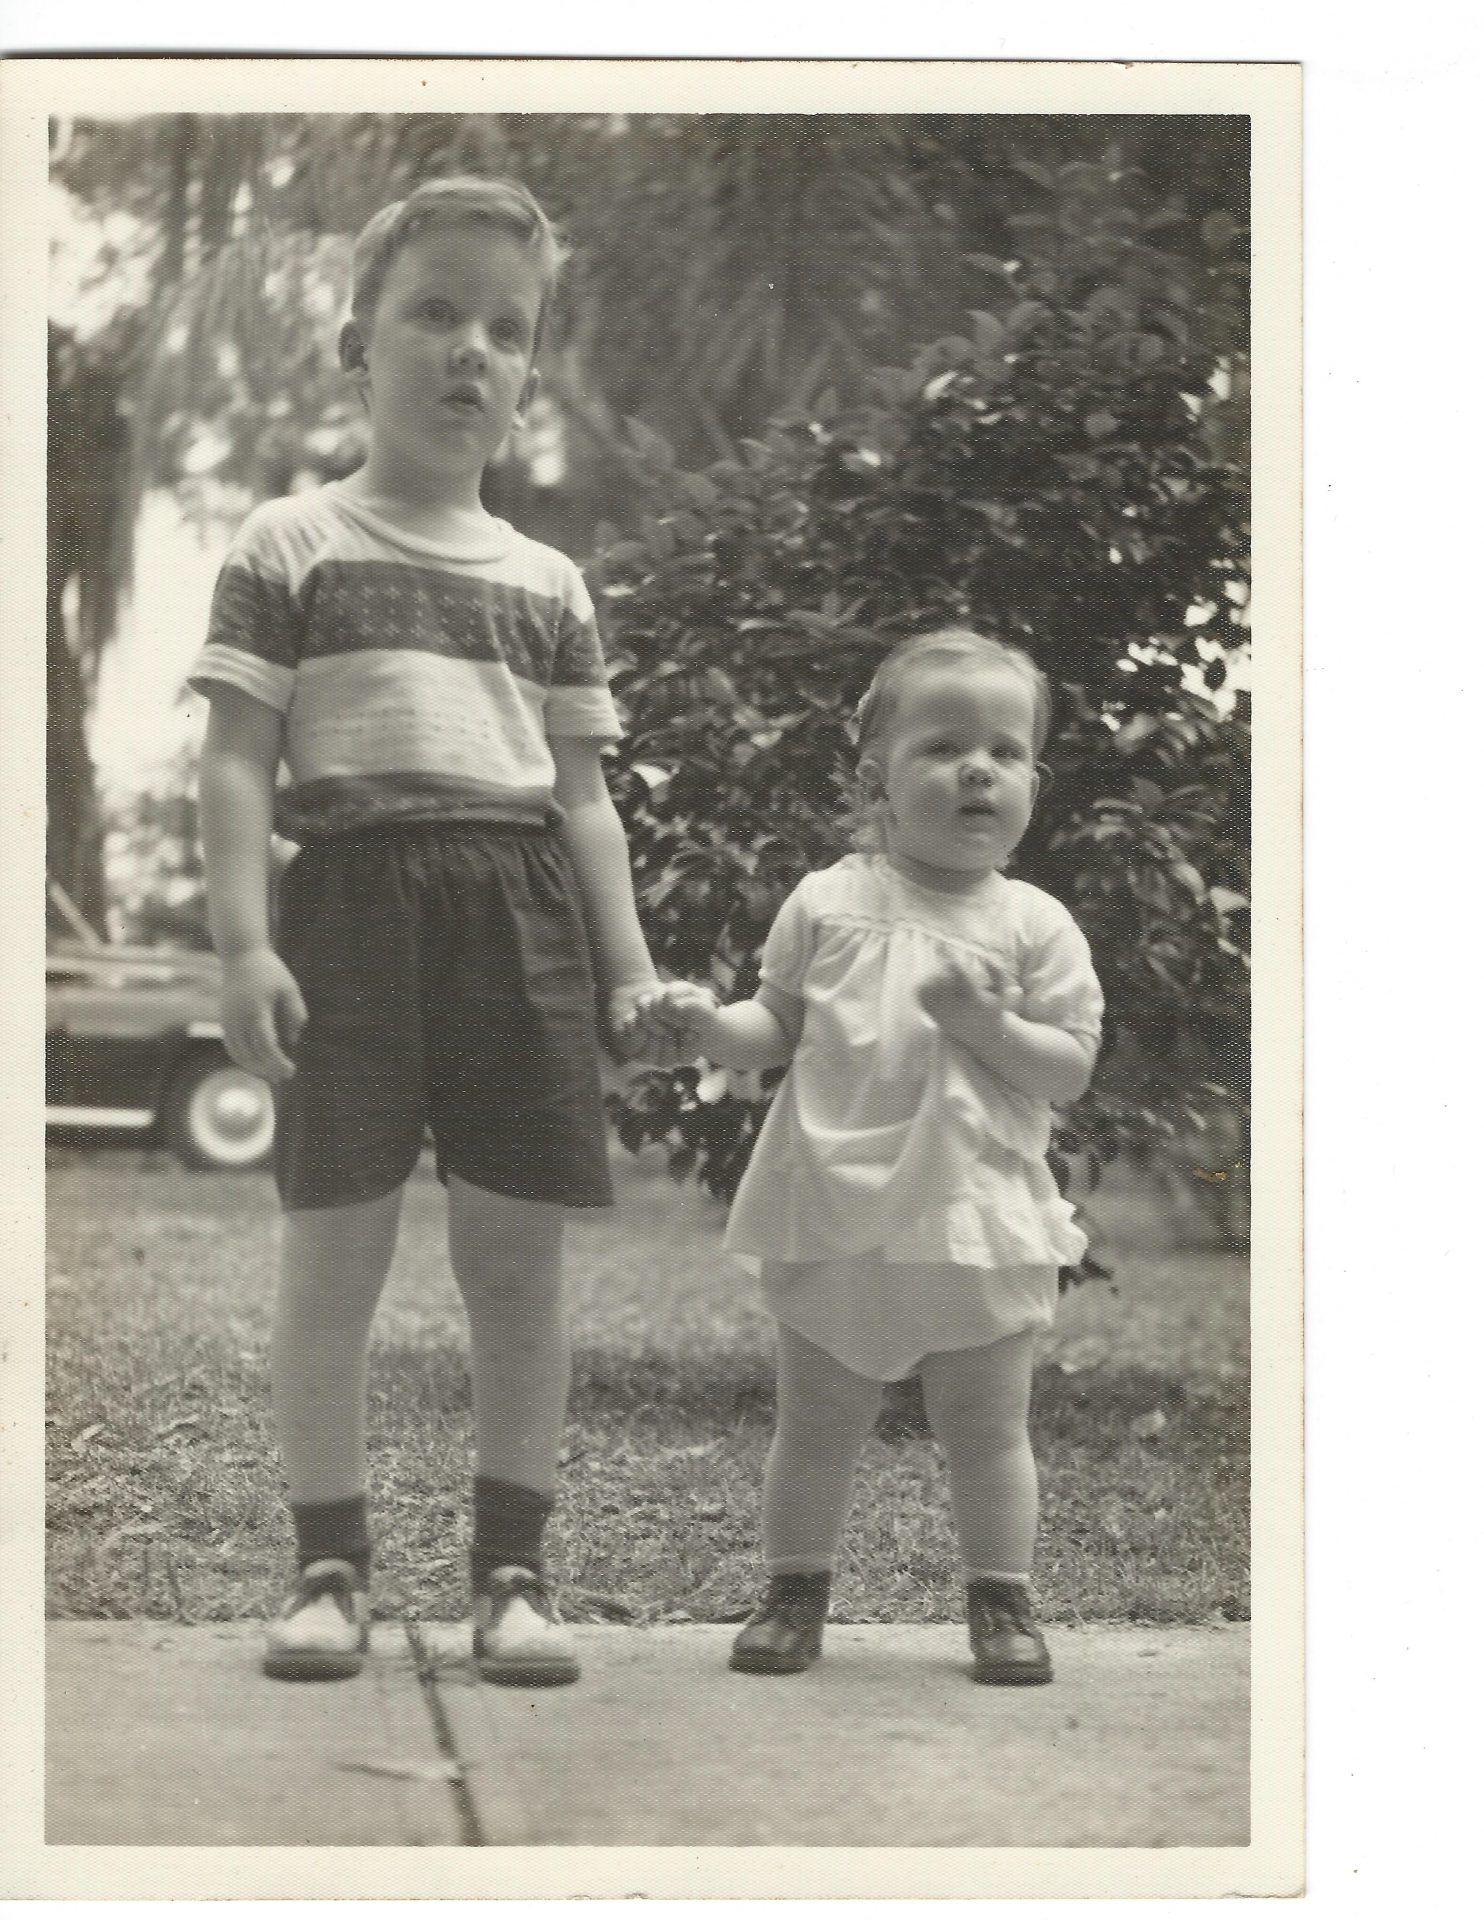 Victor and Valorie in grandmothers front yard in 1956 or so. Mother liked this picture.